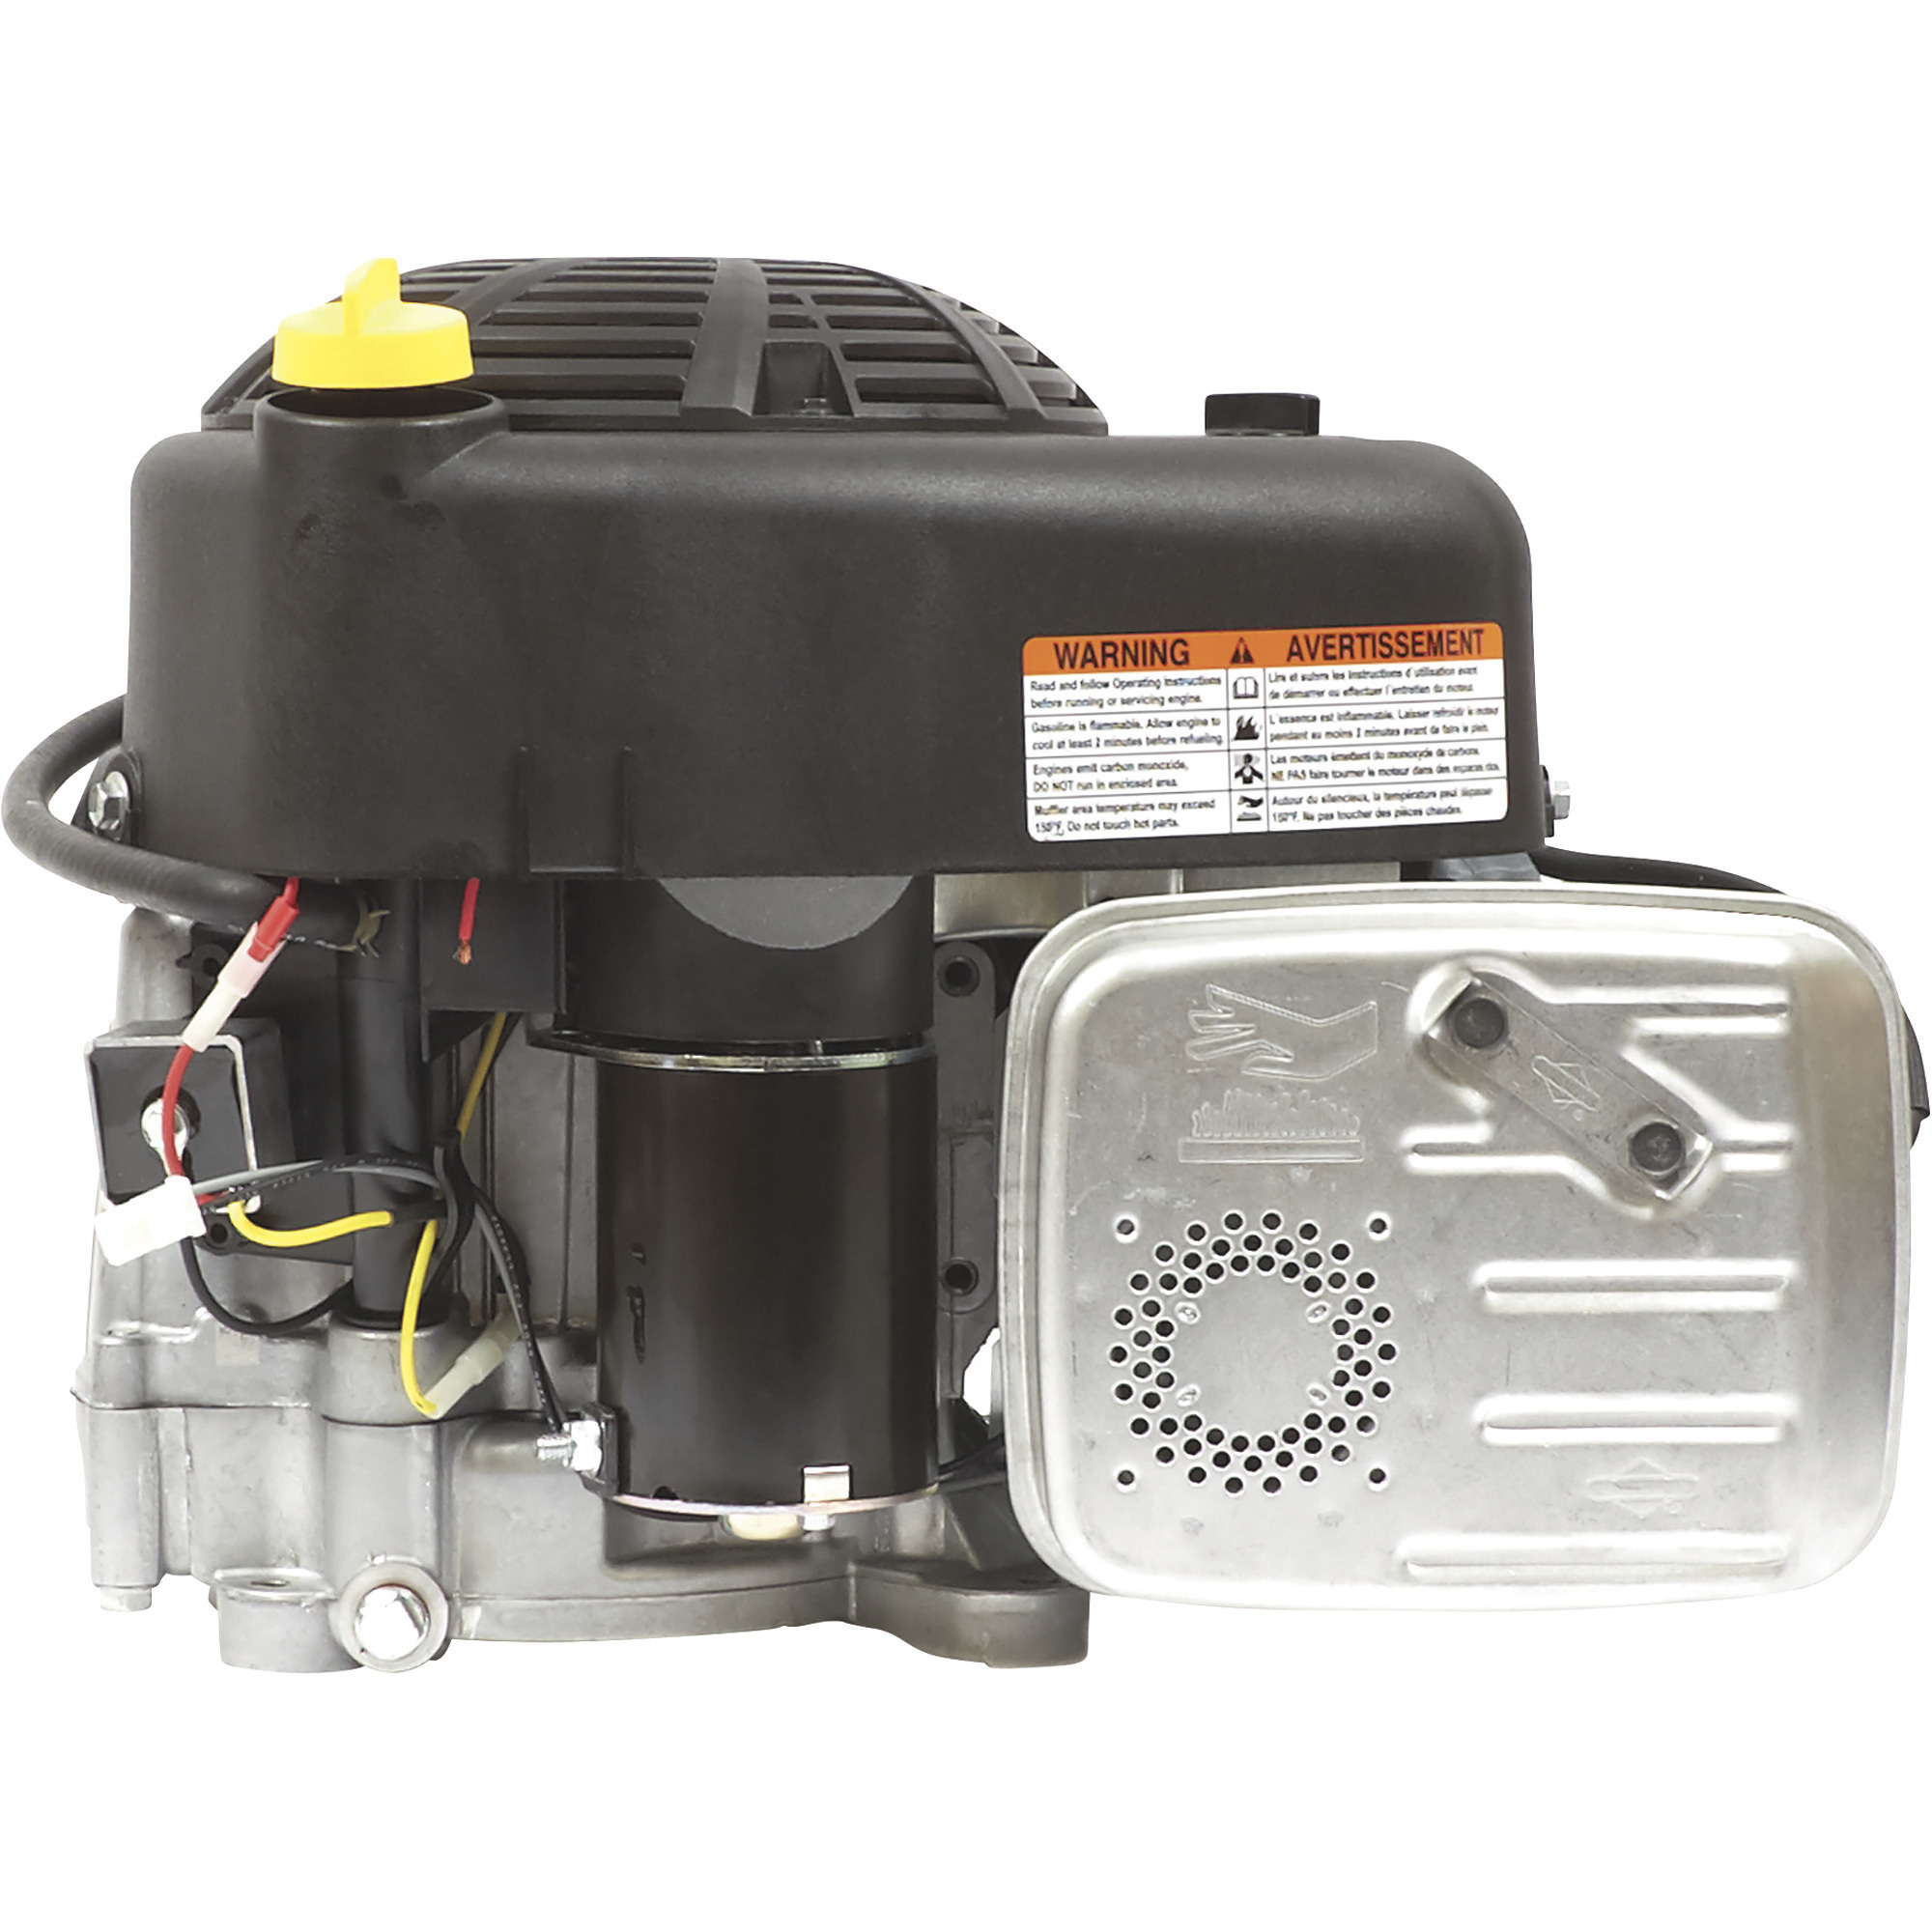 Briggs & Stratton Intek Vertical Engine with Electric Start — 14.4 HP, 1in.  x 3 5/32in. Shaft, Model# 280H07-0036-E1